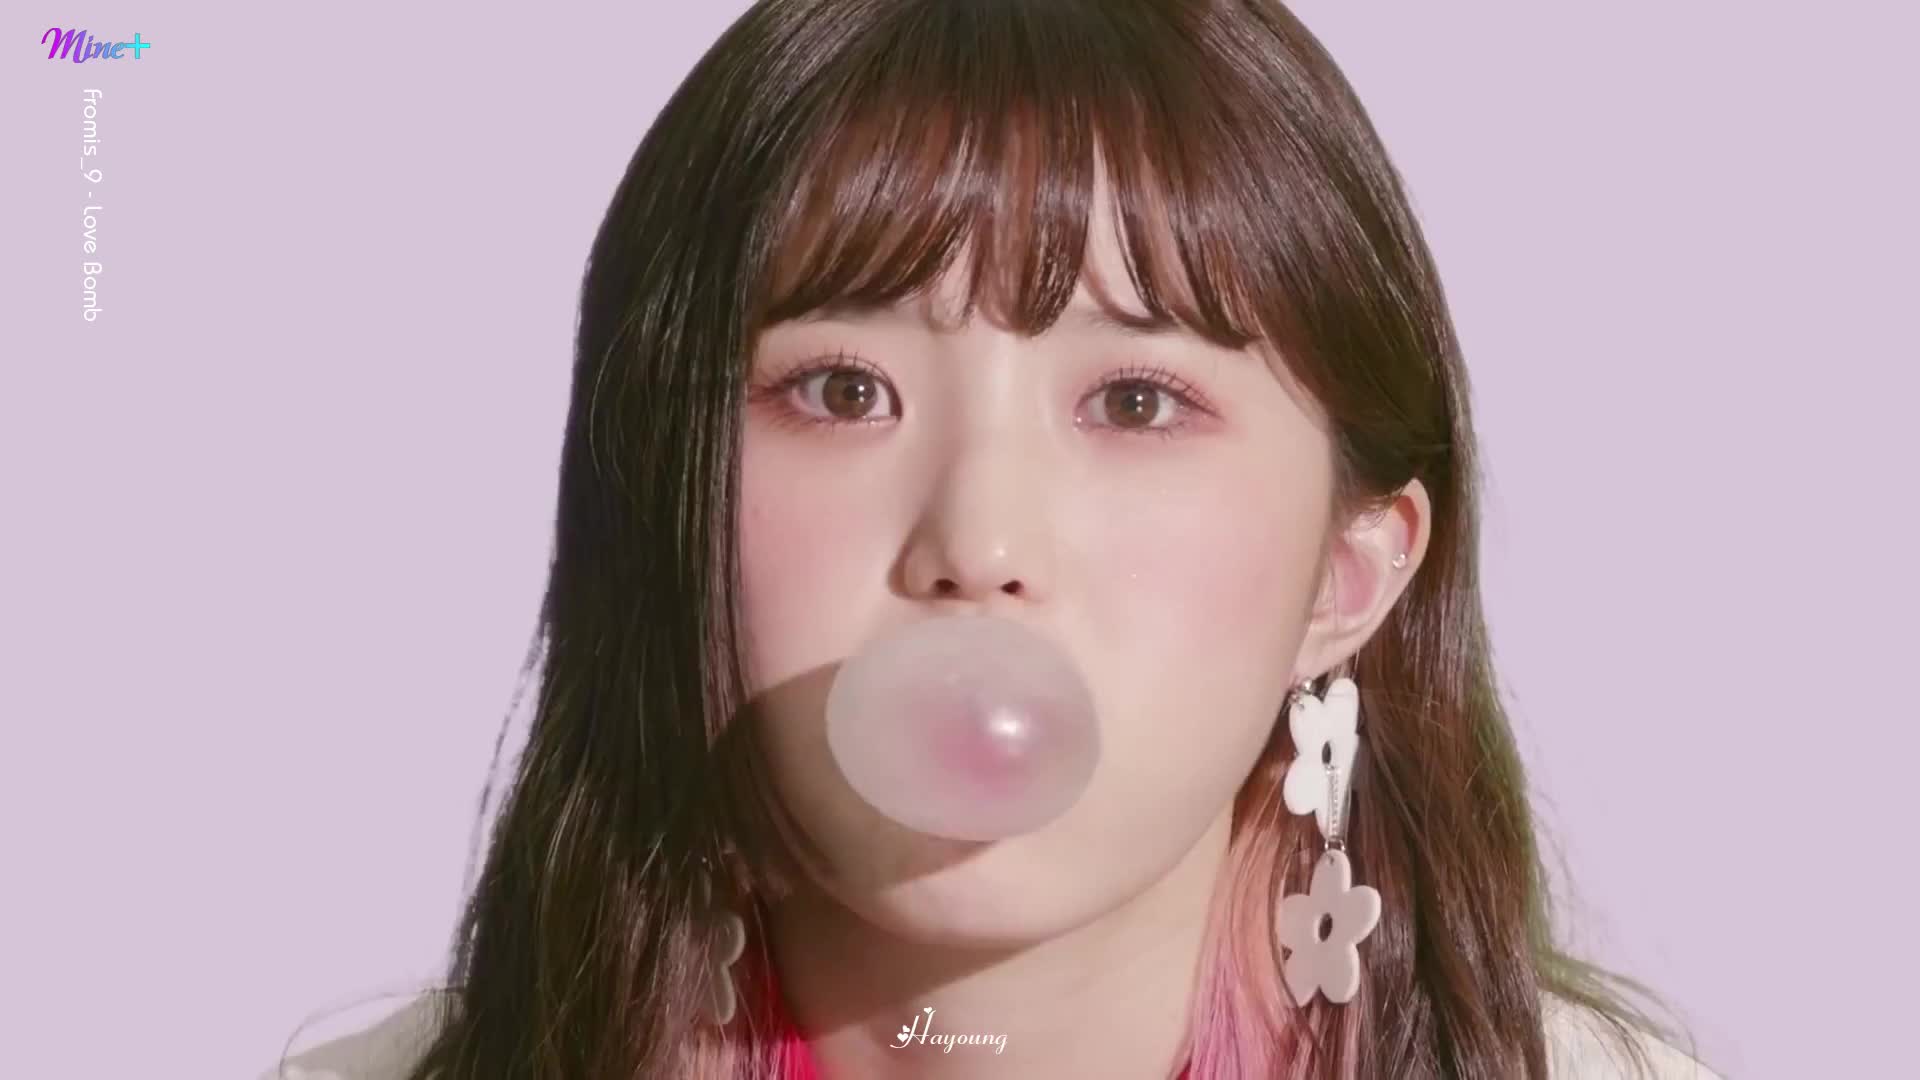 Fromis 9 Love Bomb MV Hayoung (MINE+) GIF. Find, Make & Share